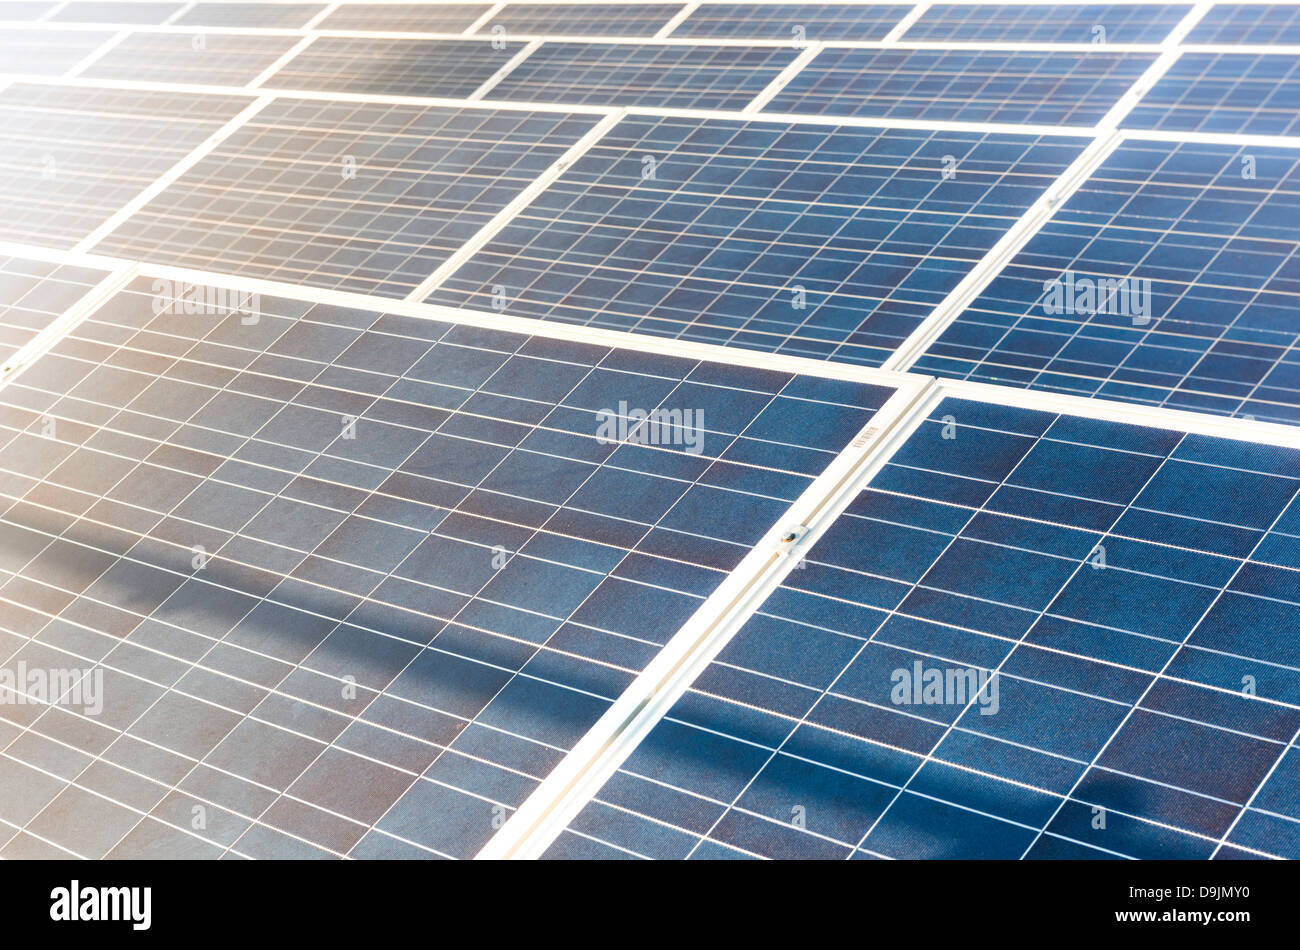 Photovoltaic solar panels on a factory roof. Stock Photo